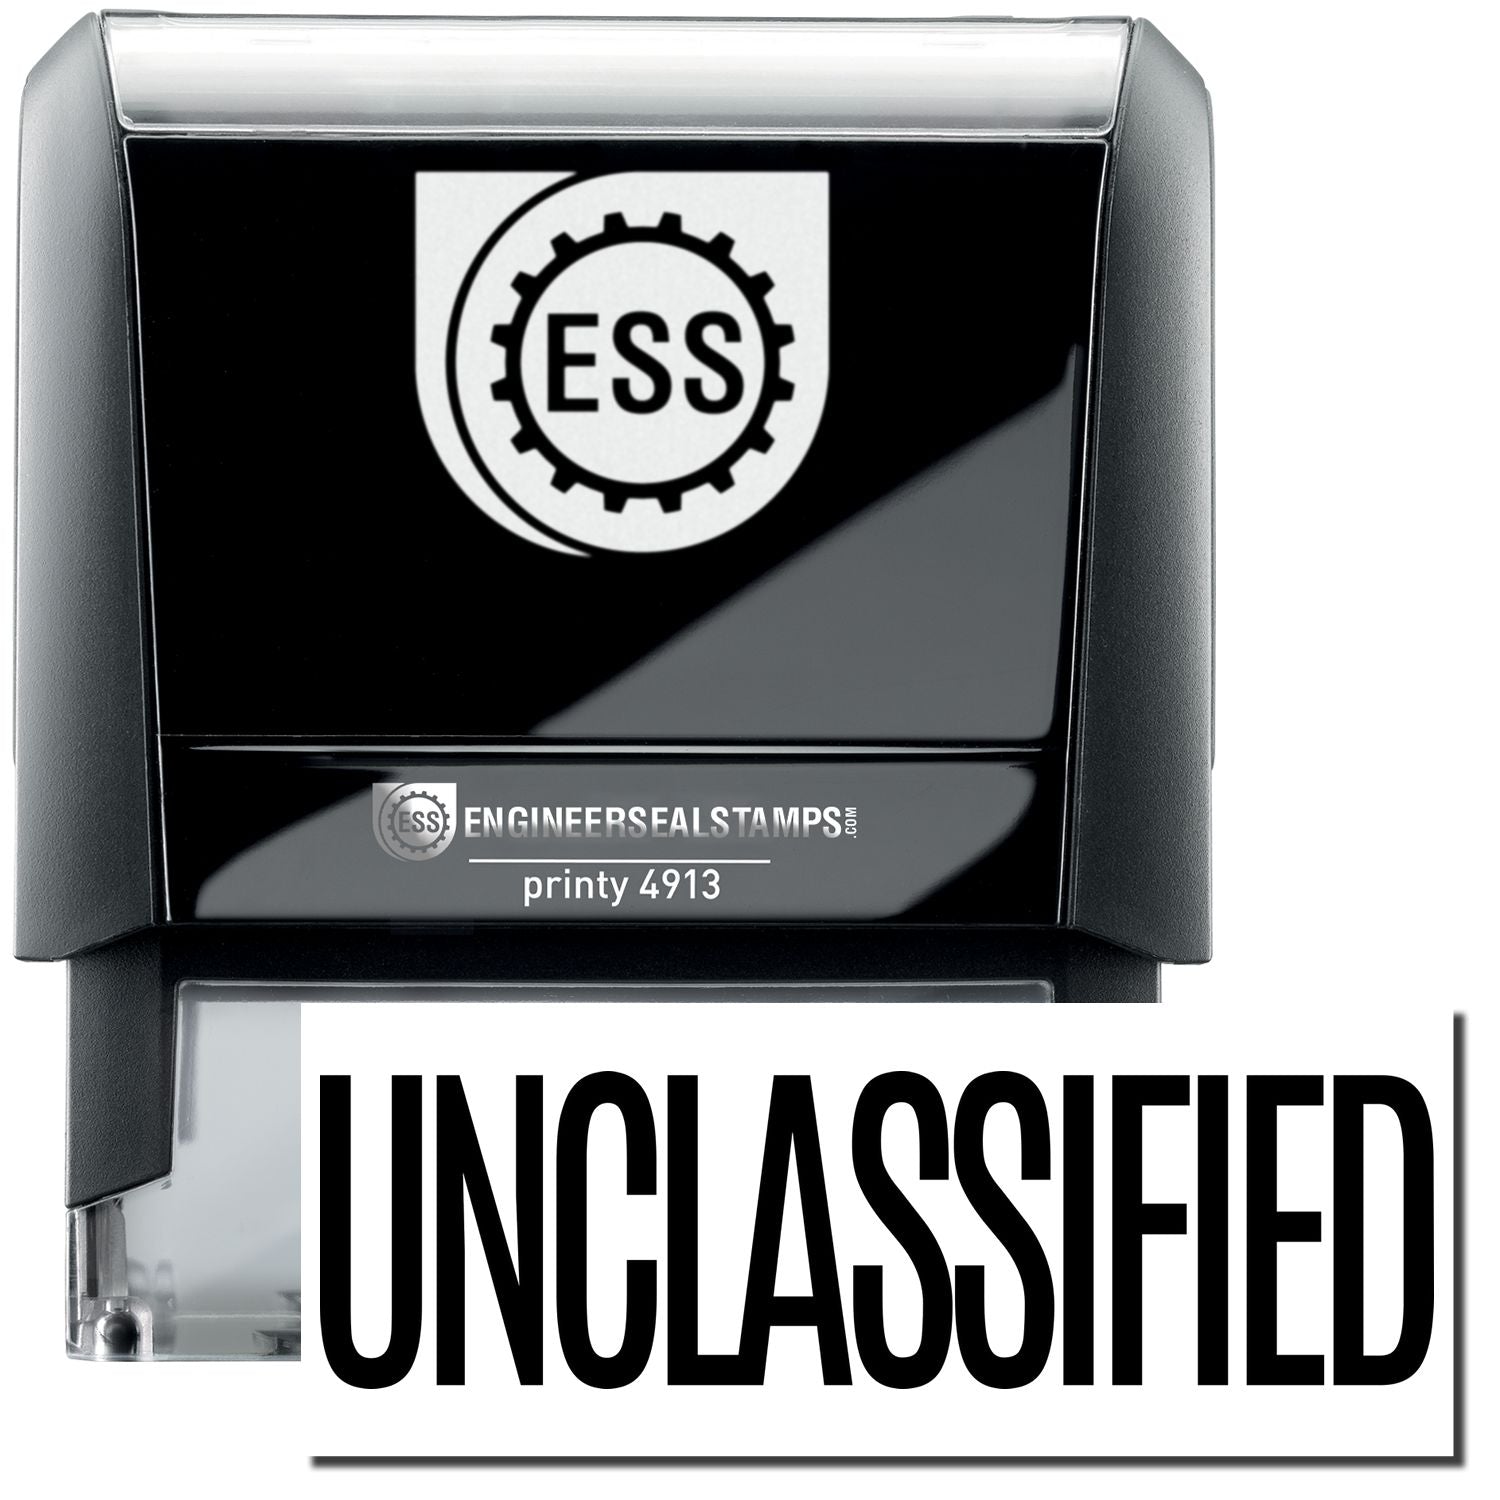 A self-inking stamp with a stamped image showing how the text "UNCLASSIFIED" in a large font is displayed by it after stamping.